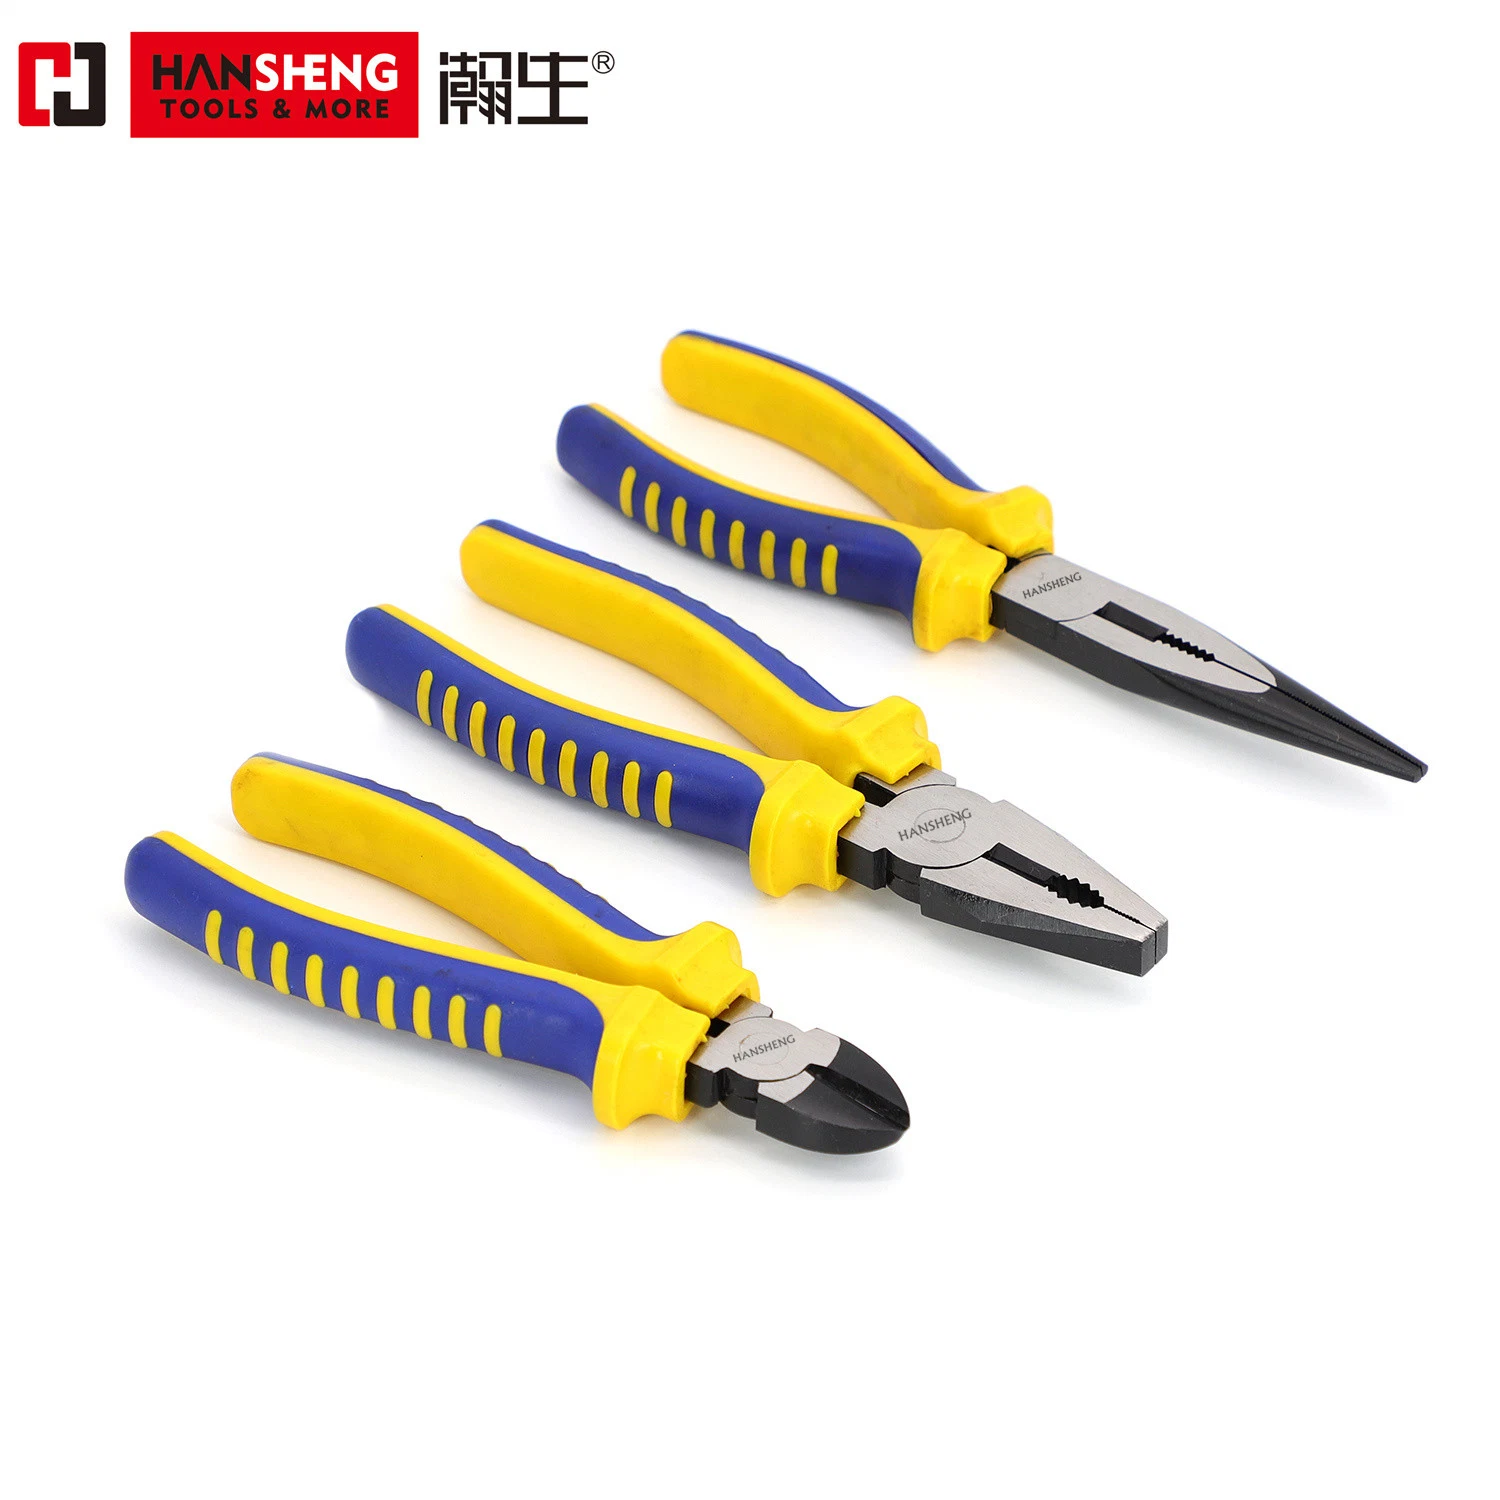 Professional Combination Pliers, Hand Tool, Hardware, Made of CRV, Pearl-Nickel Plated, Nickel Plated PVC Handles, German Type, Diagonal Cutting Pliers